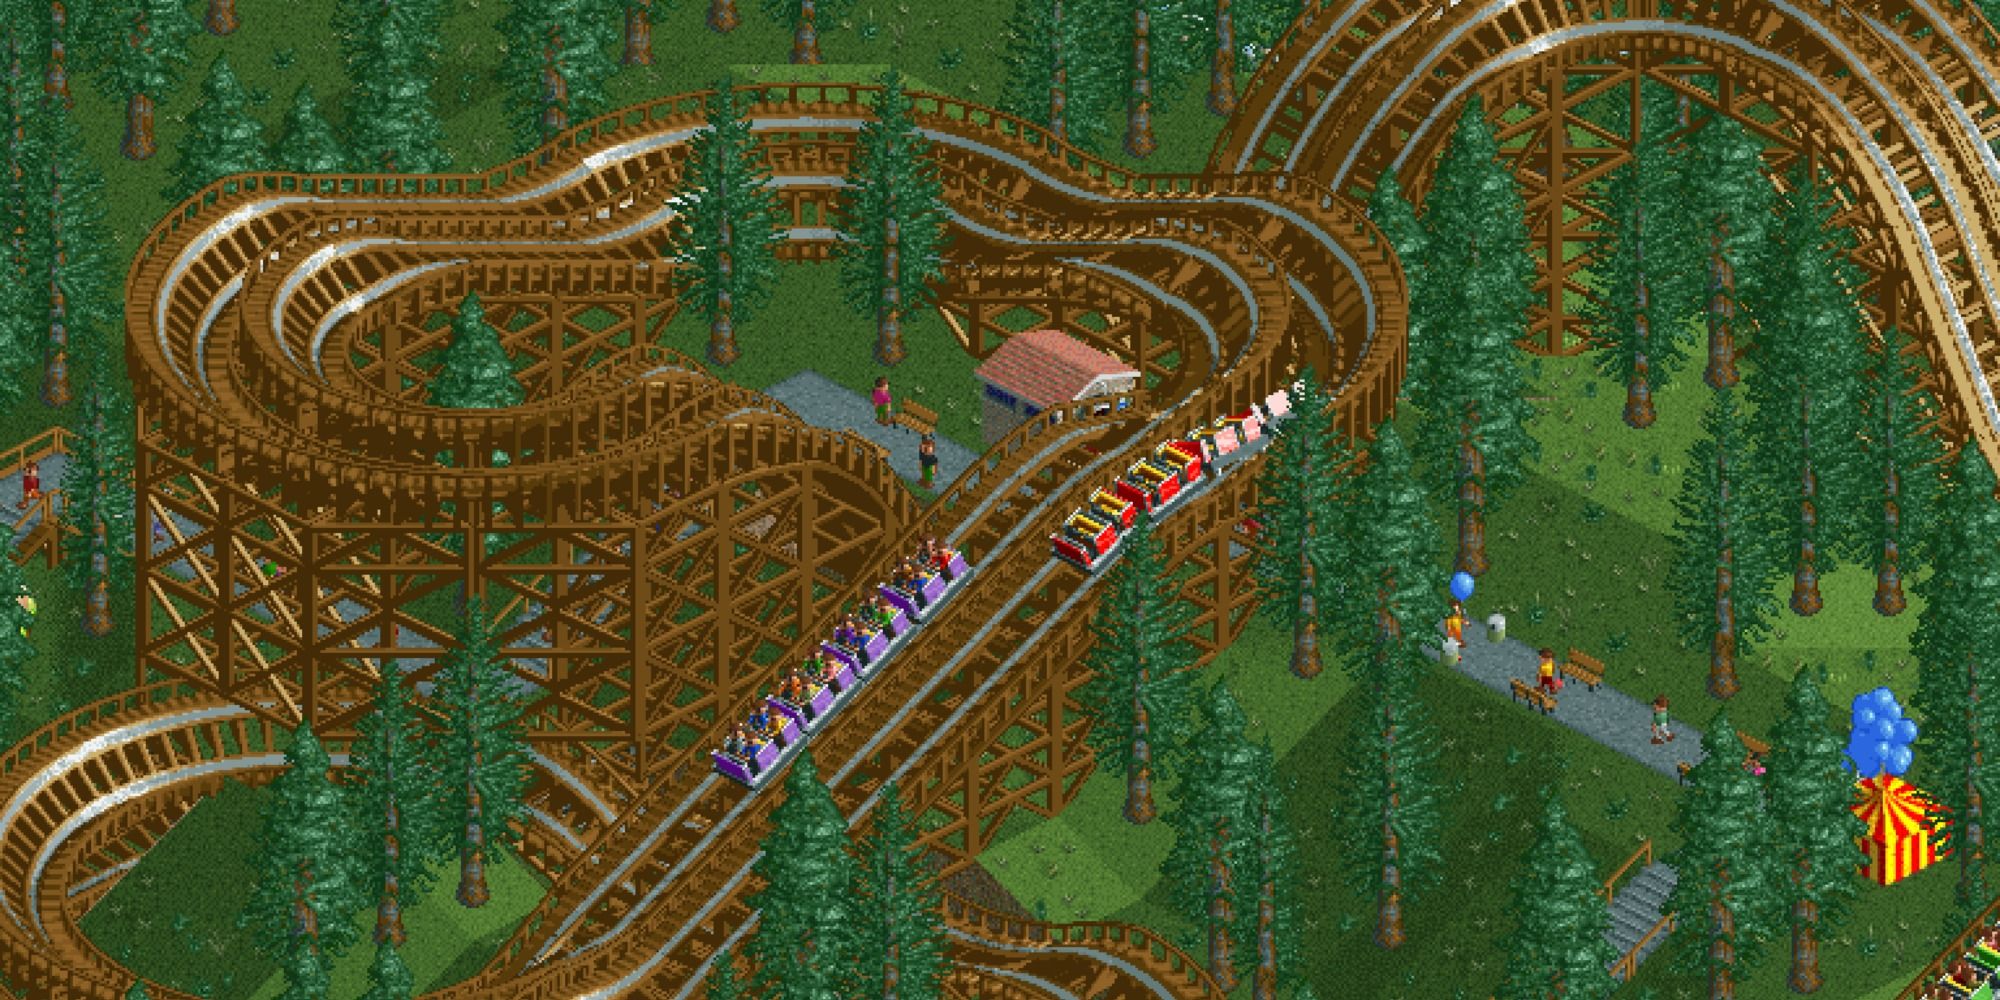 Roller Coaster Tycoon Wooden Roller Coaster in a forest